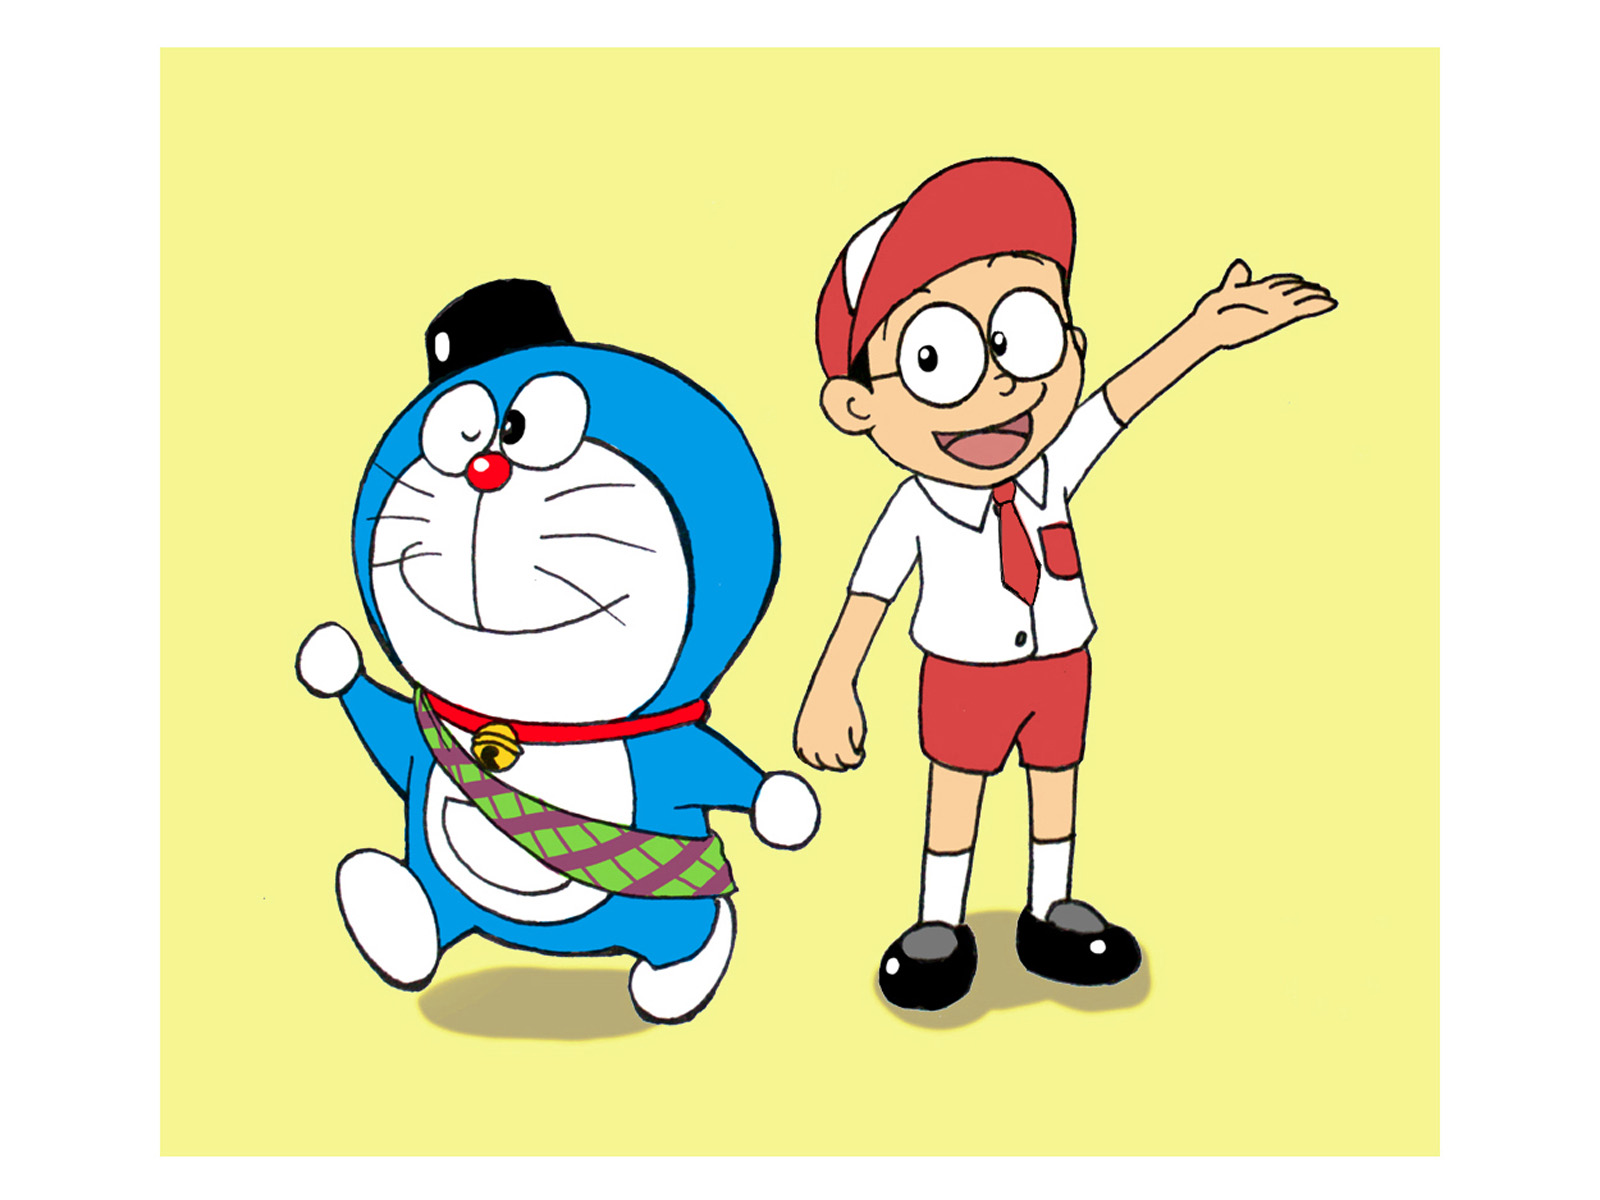 Tagged with: Awesome Doraemon Wallpaper Doraemon Cute Wallpaper